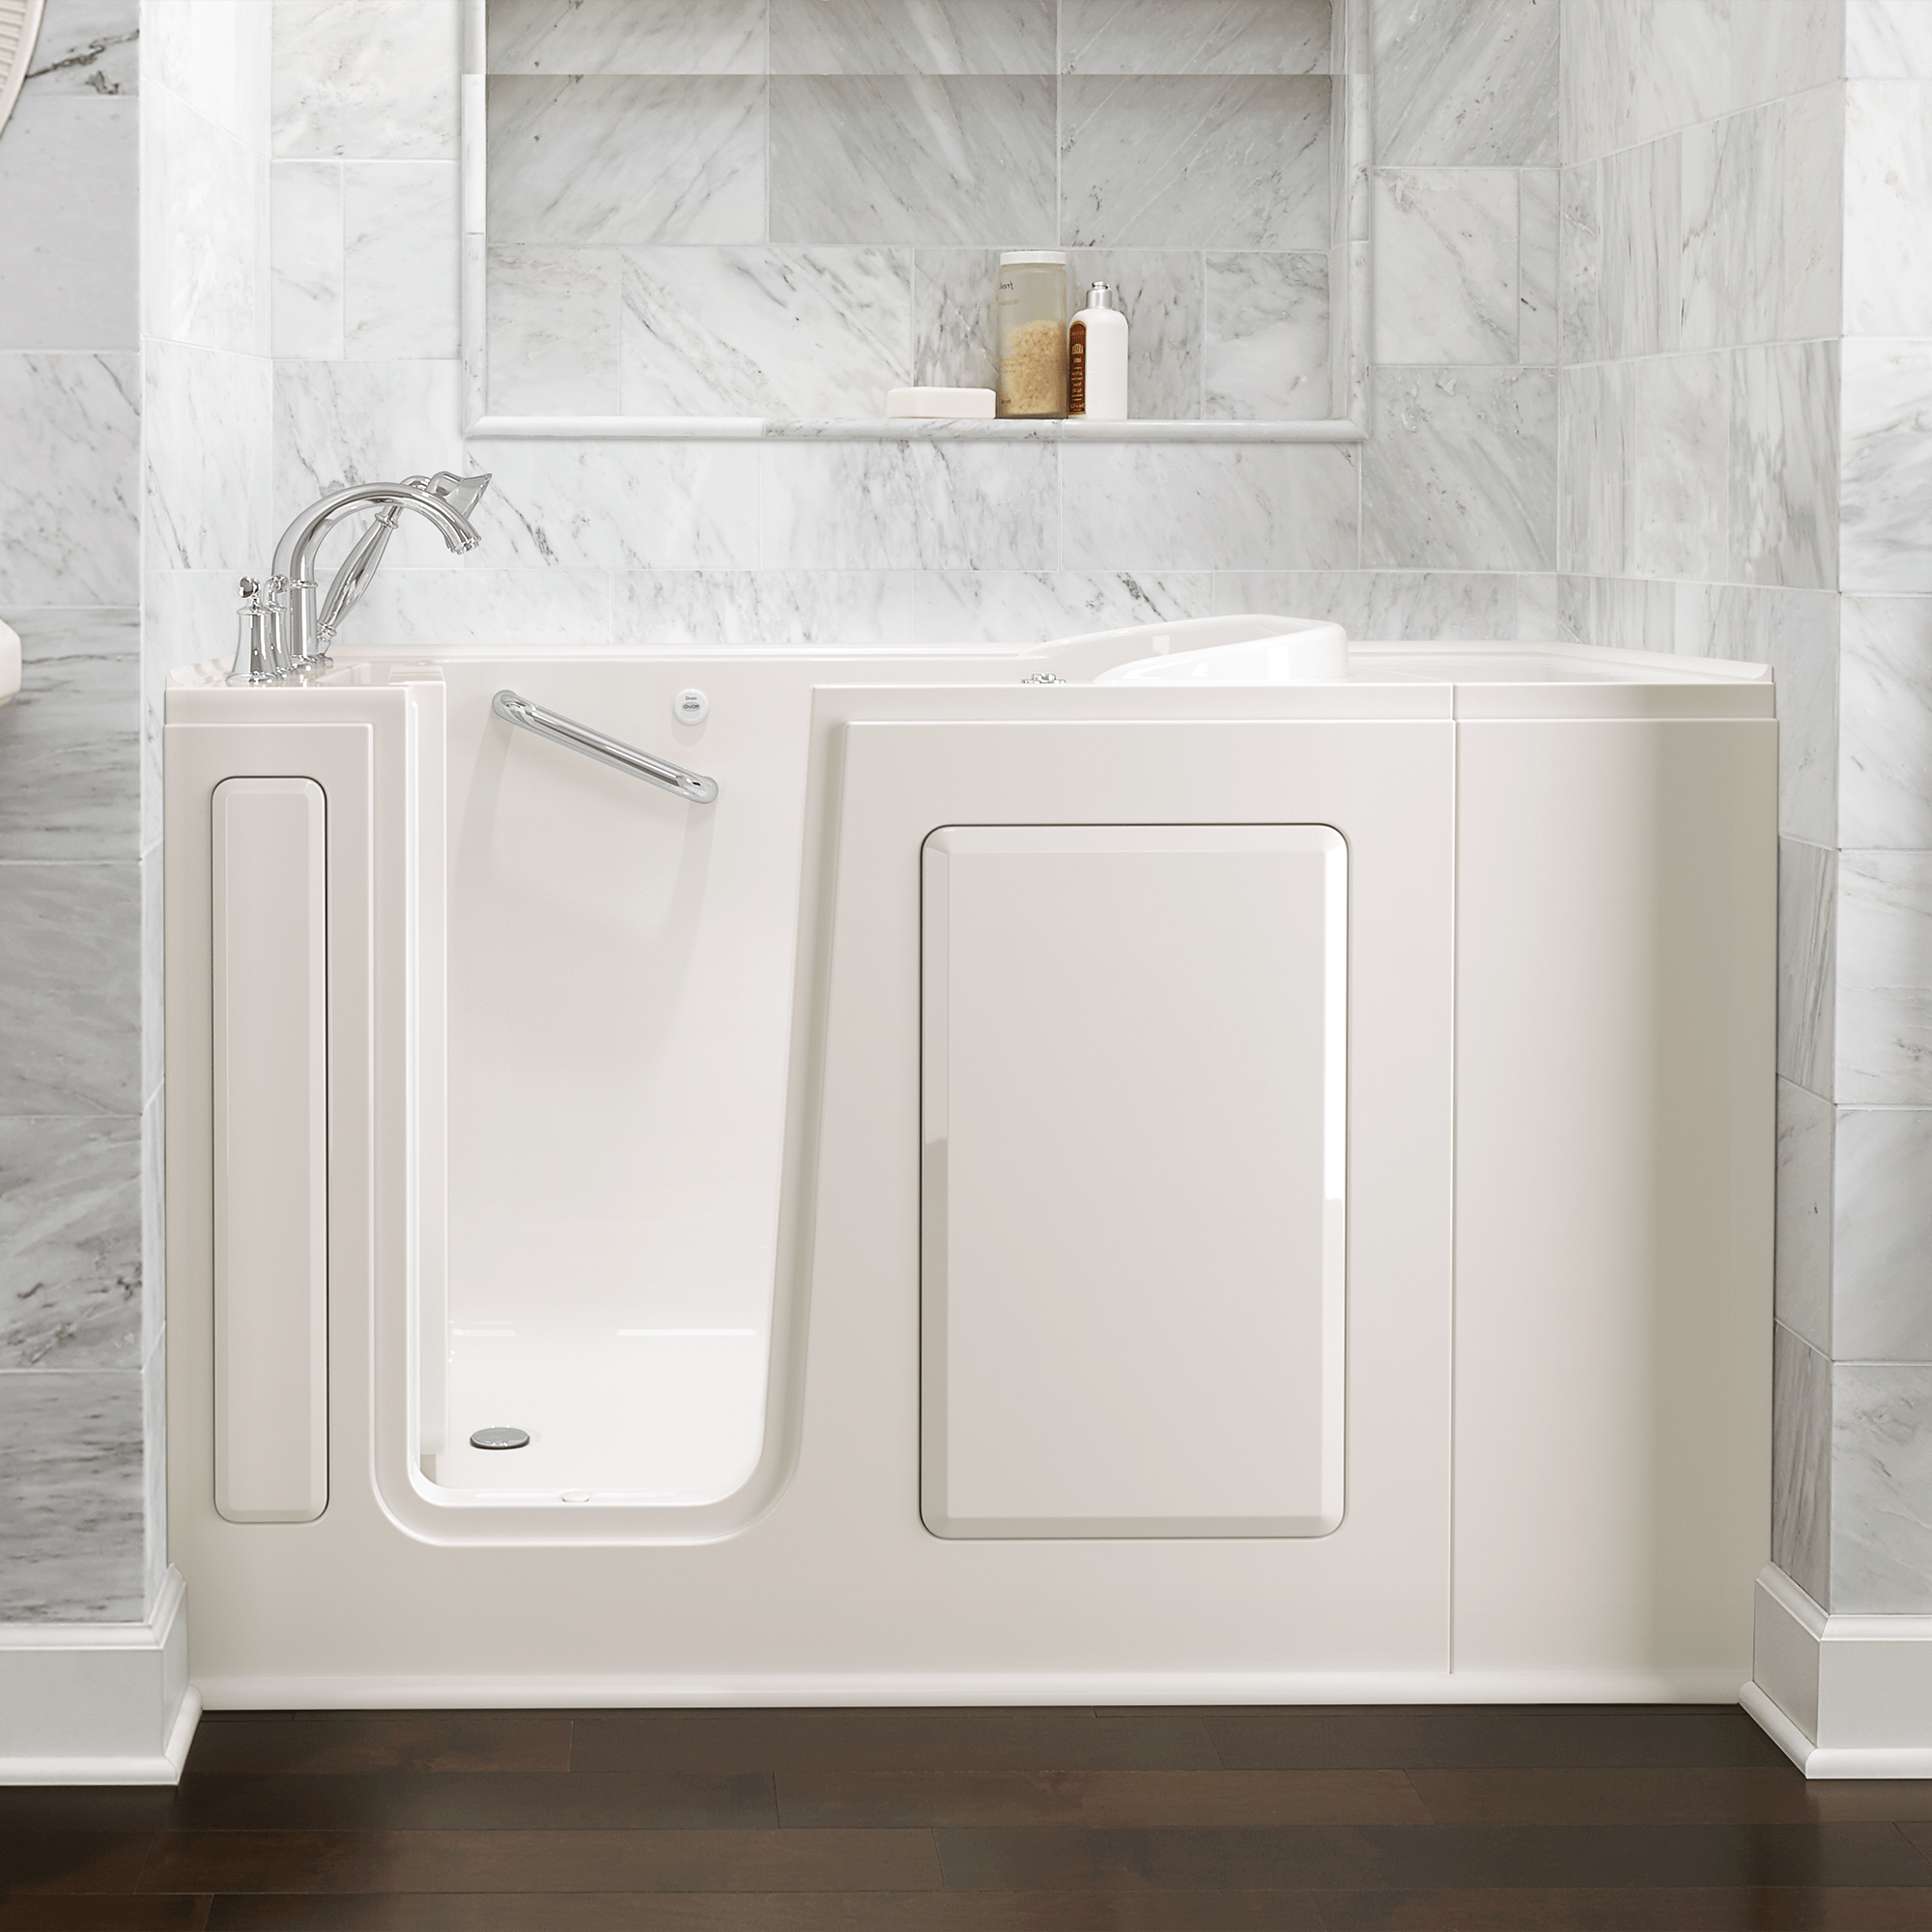 Gelcoat Value Series 28x48-inch Walk-in Bathtub with Whirlpool System  Left Hand Door and Drain